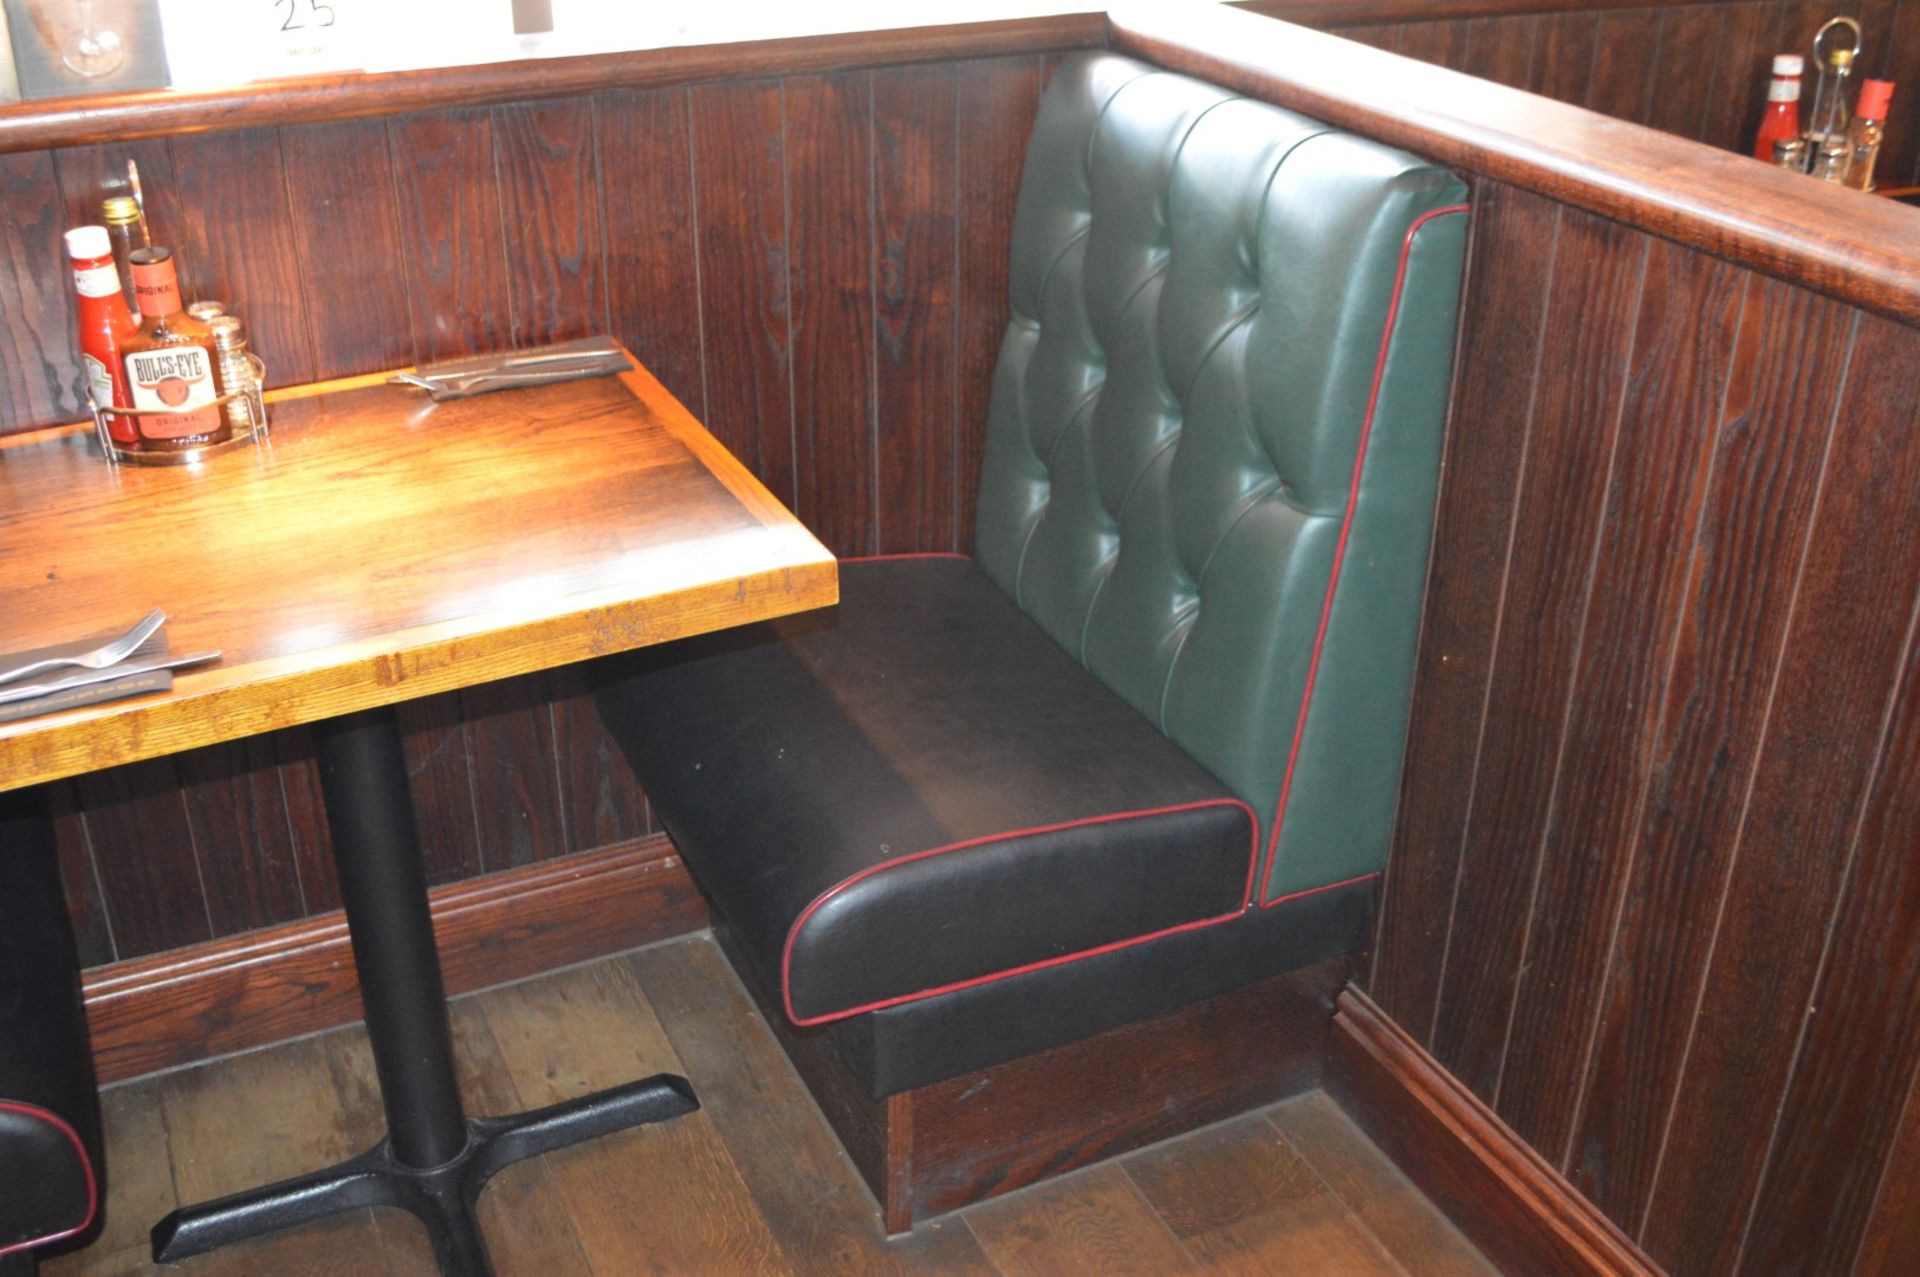 4 x Sections of Restaurant Booth Seating - Include 2 x Single Seats and 2 x Single Back to Back Seat - Image 11 of 12